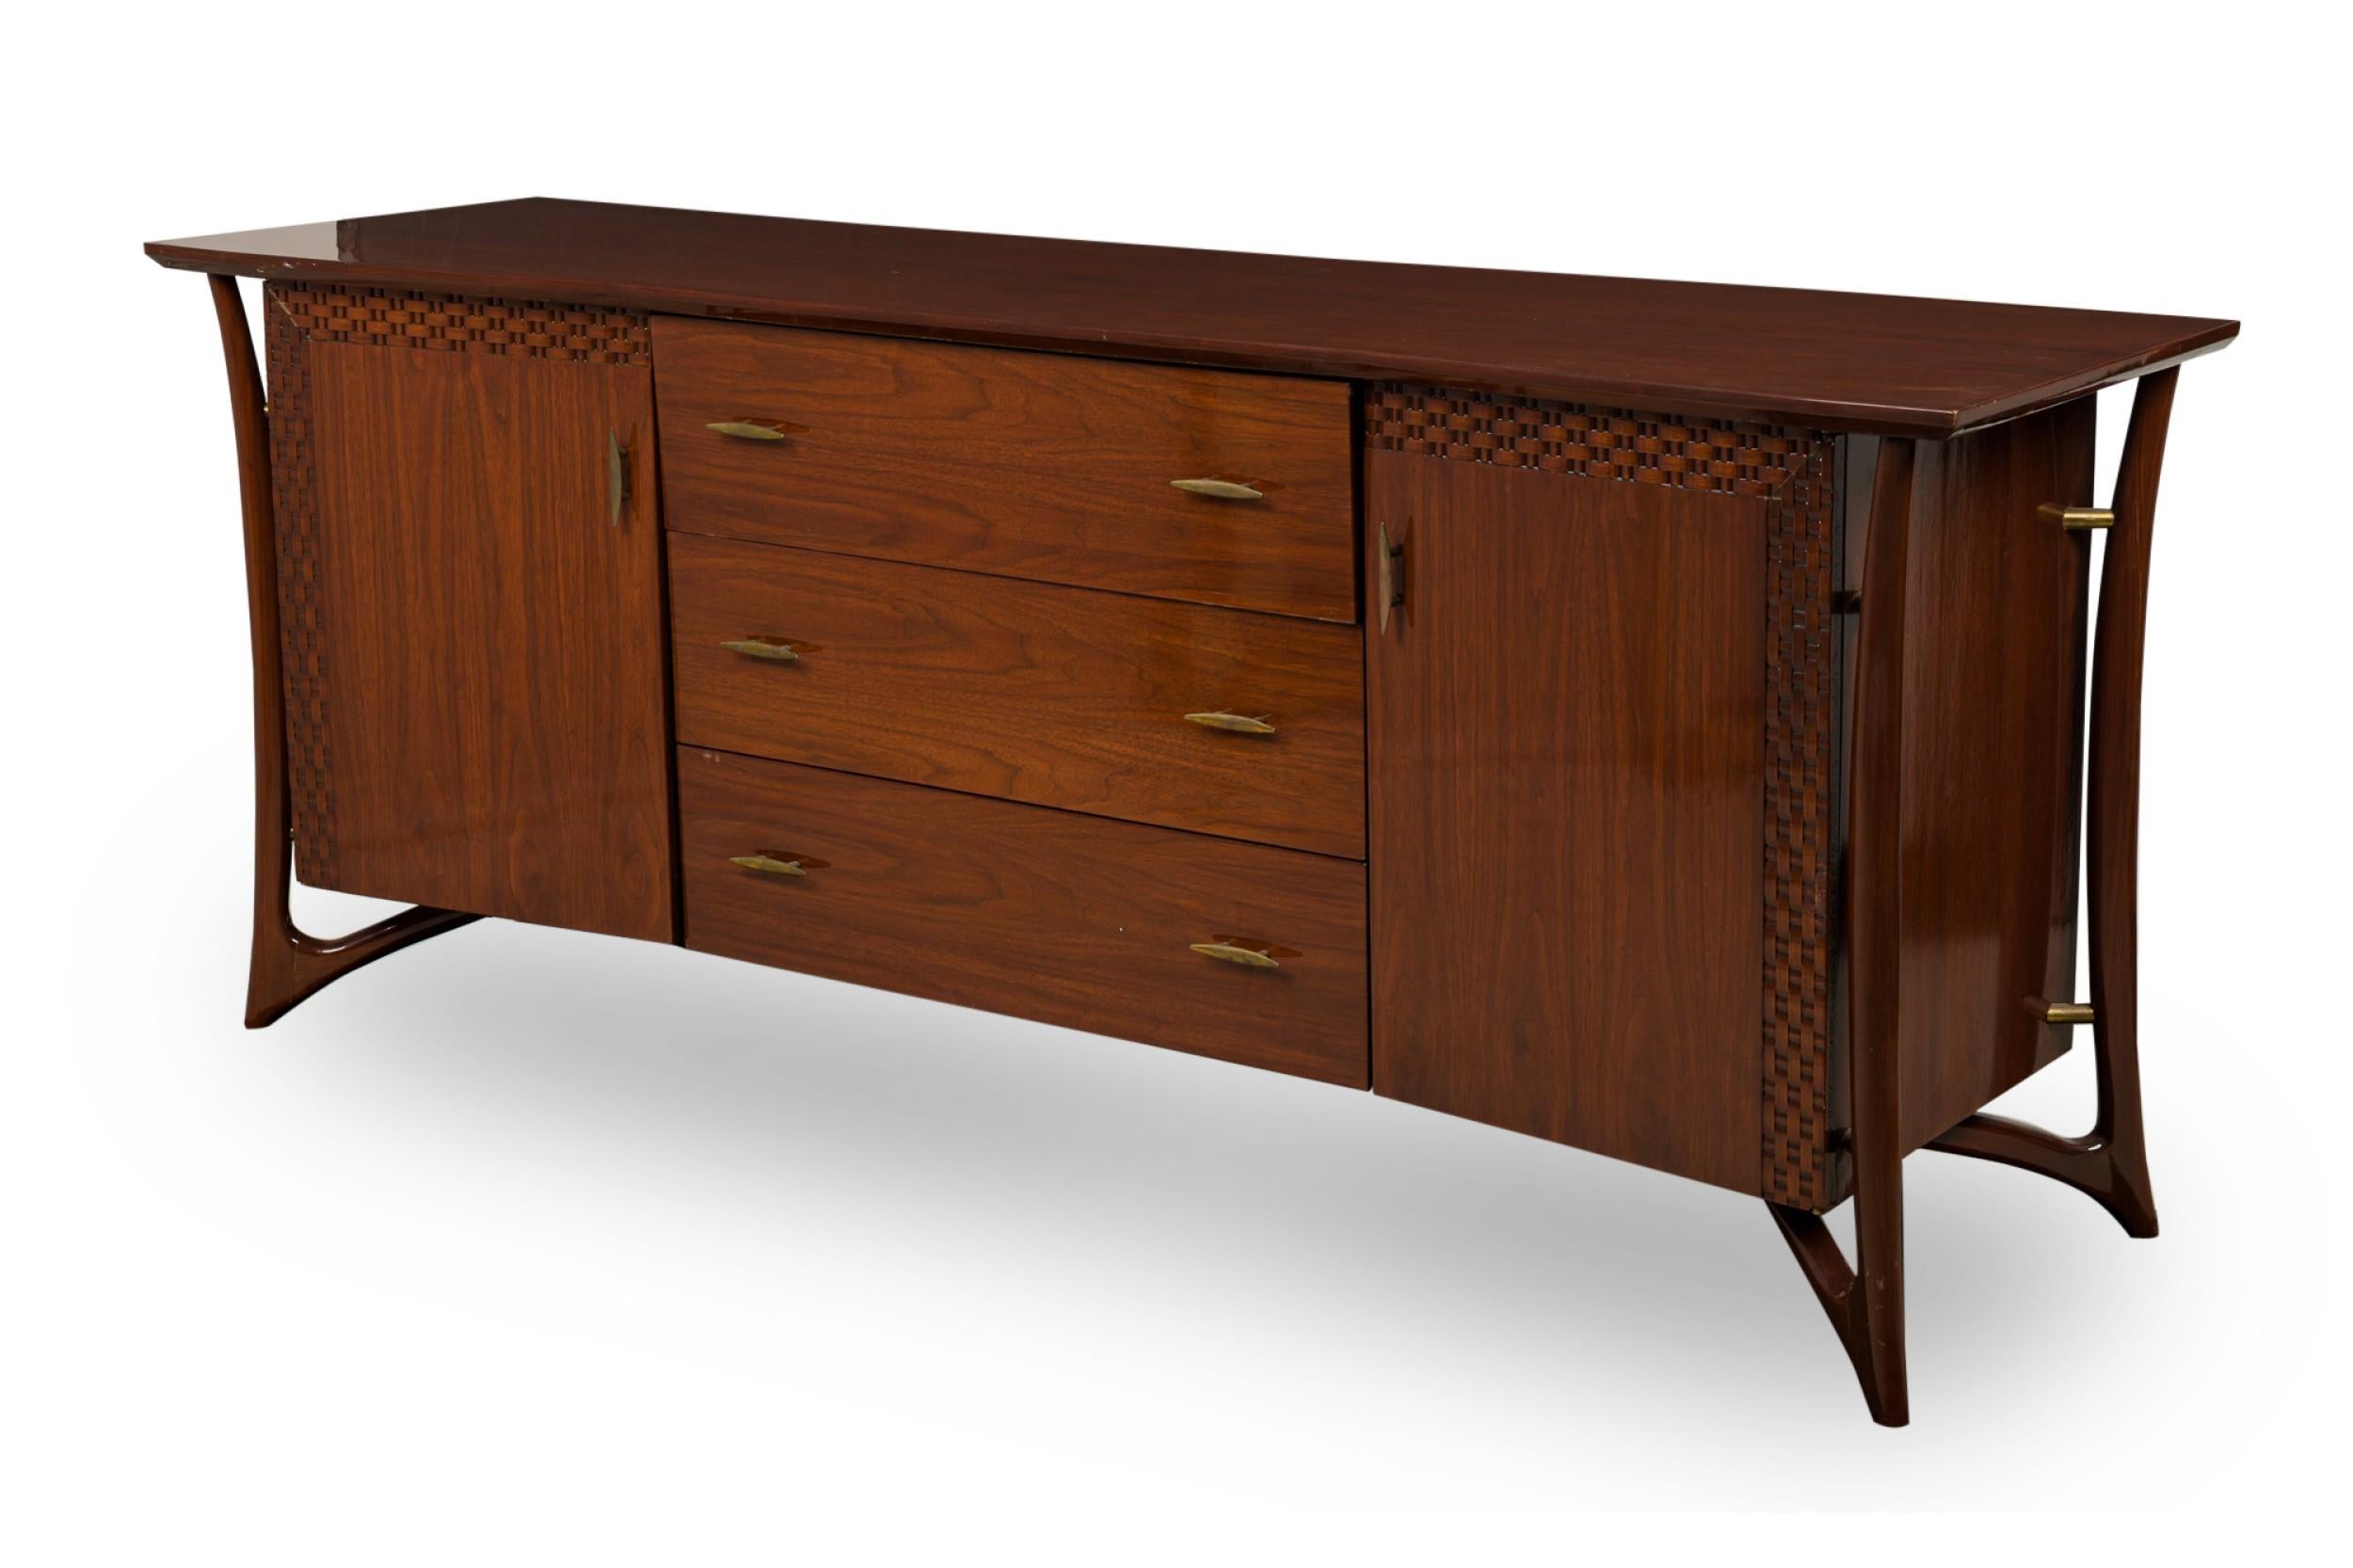 Italian Mid-Century rosewood sideboard with 2 side doors having a carved woven border centering 3 drawers with brass handles and trim (att: LUCIANO FRIGERIO)
